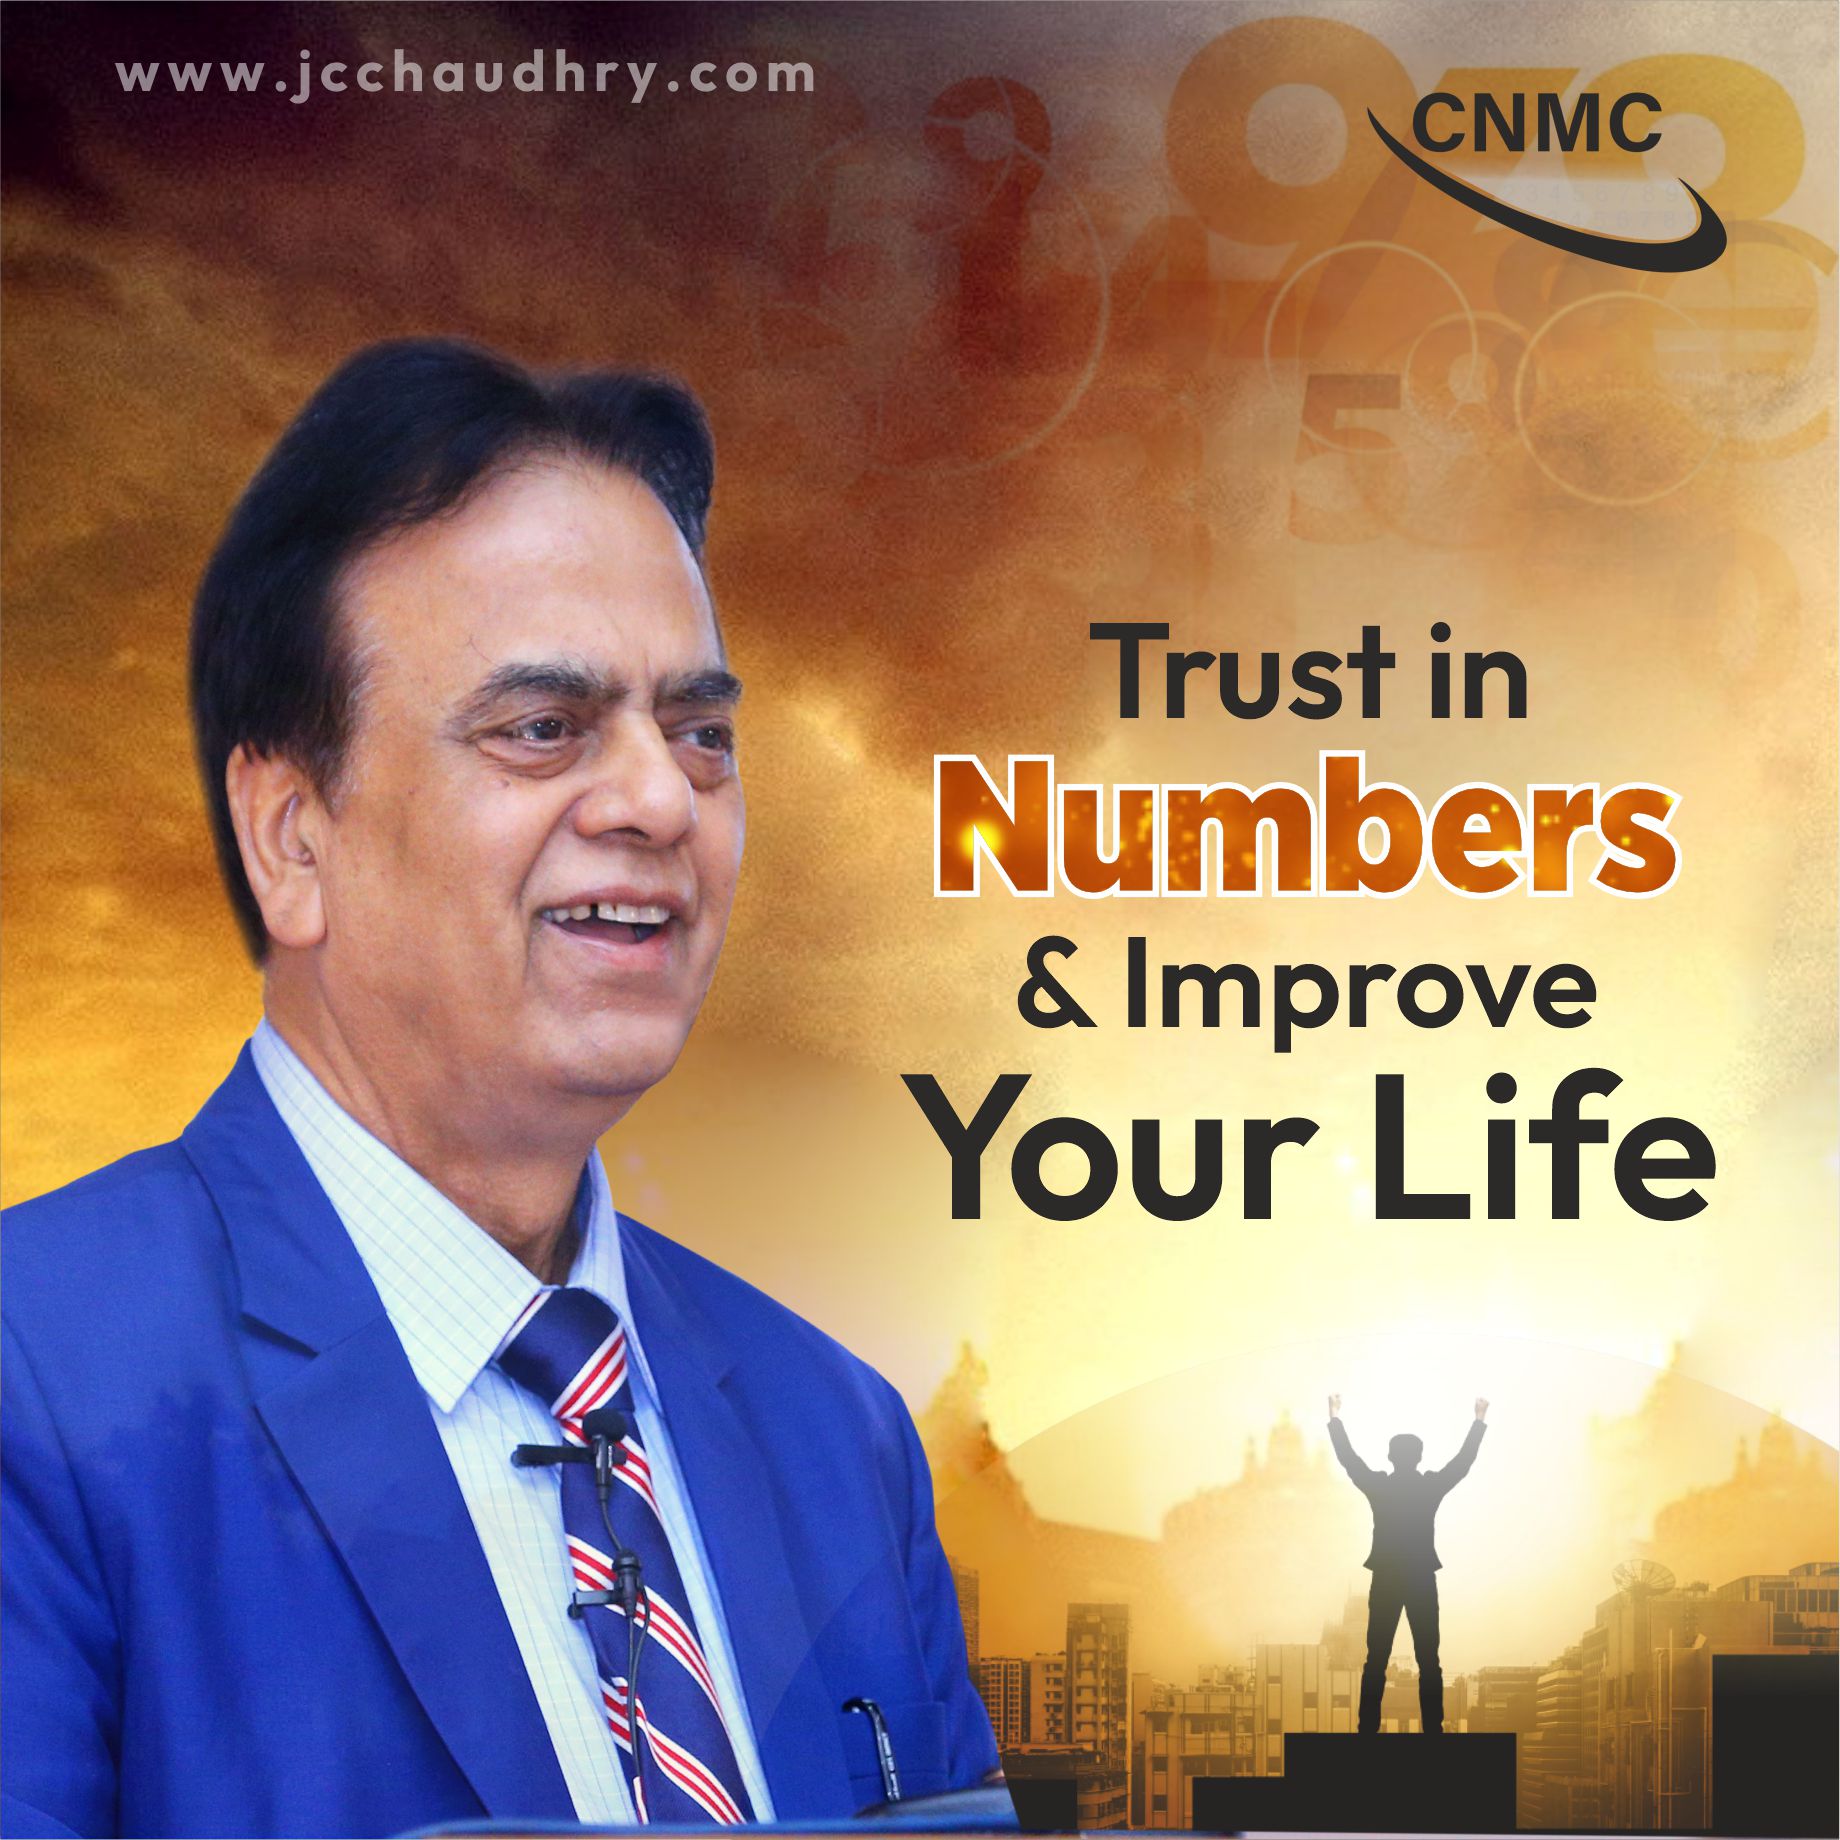  Numerology in USA  Dr J C Chaudhry - New York - New York ID1515935